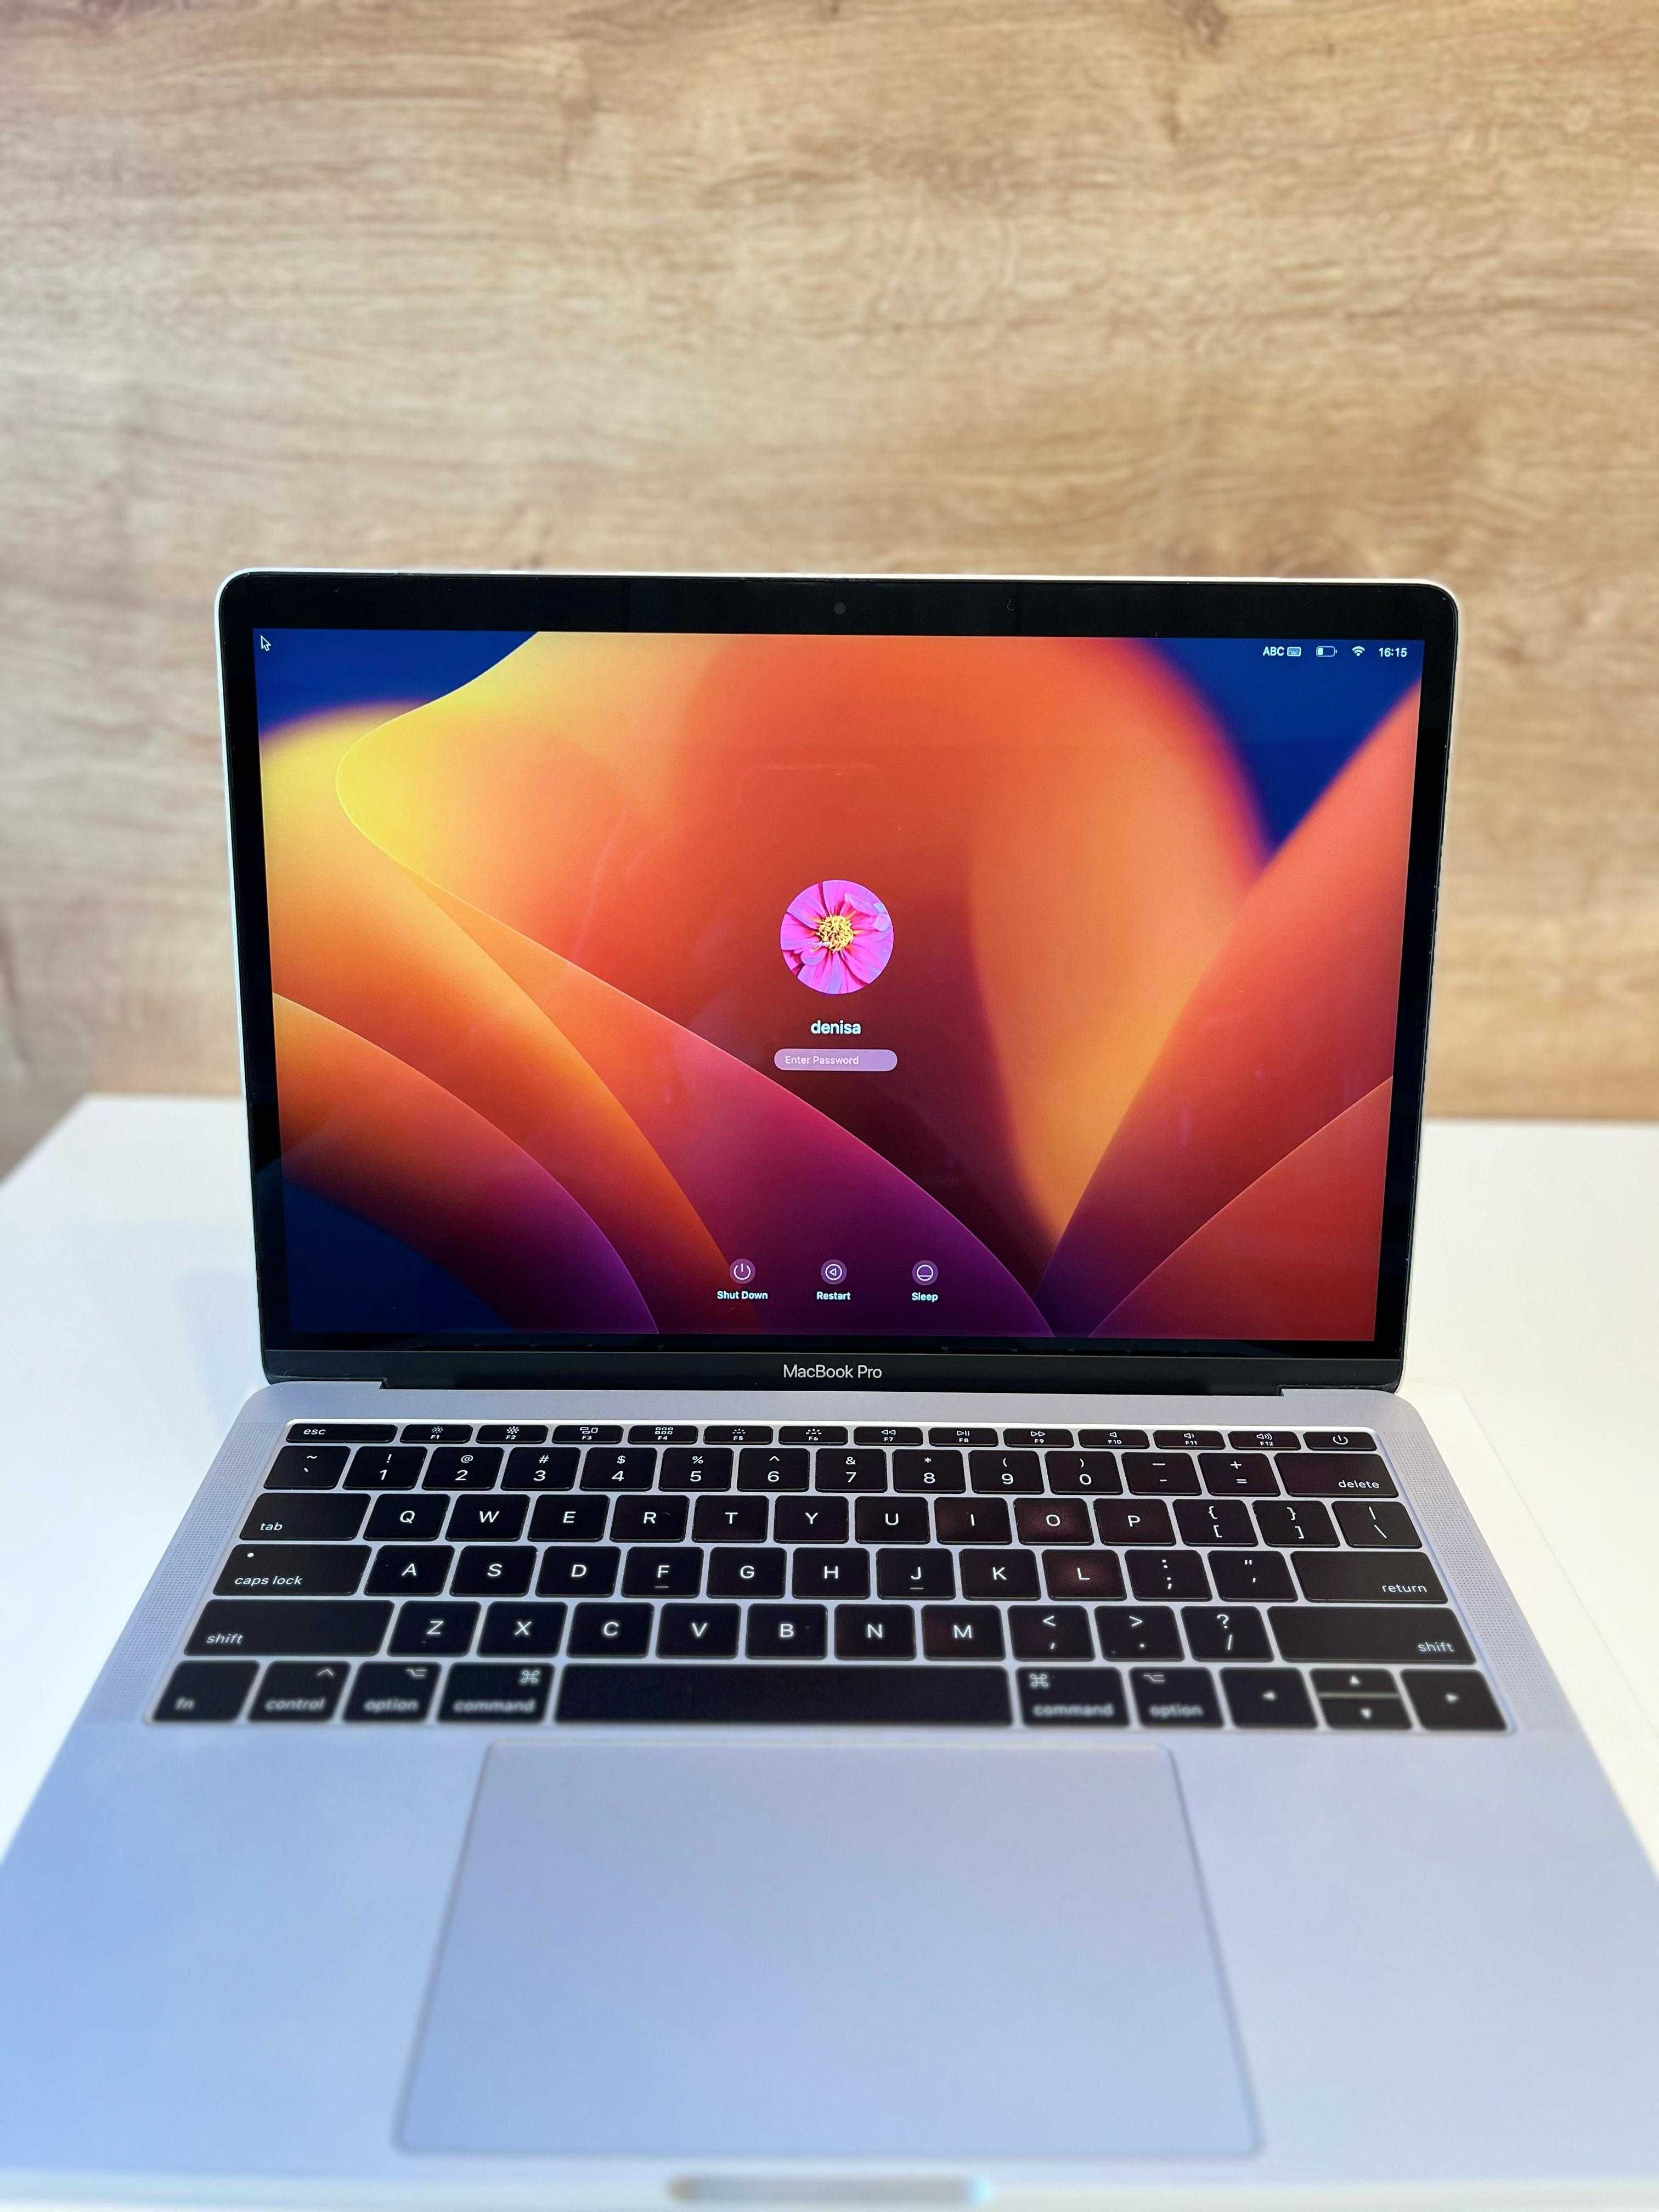 MacBook Pro (13-inch, 2017, Two Thunderbolt 3 ports), stare excelenta